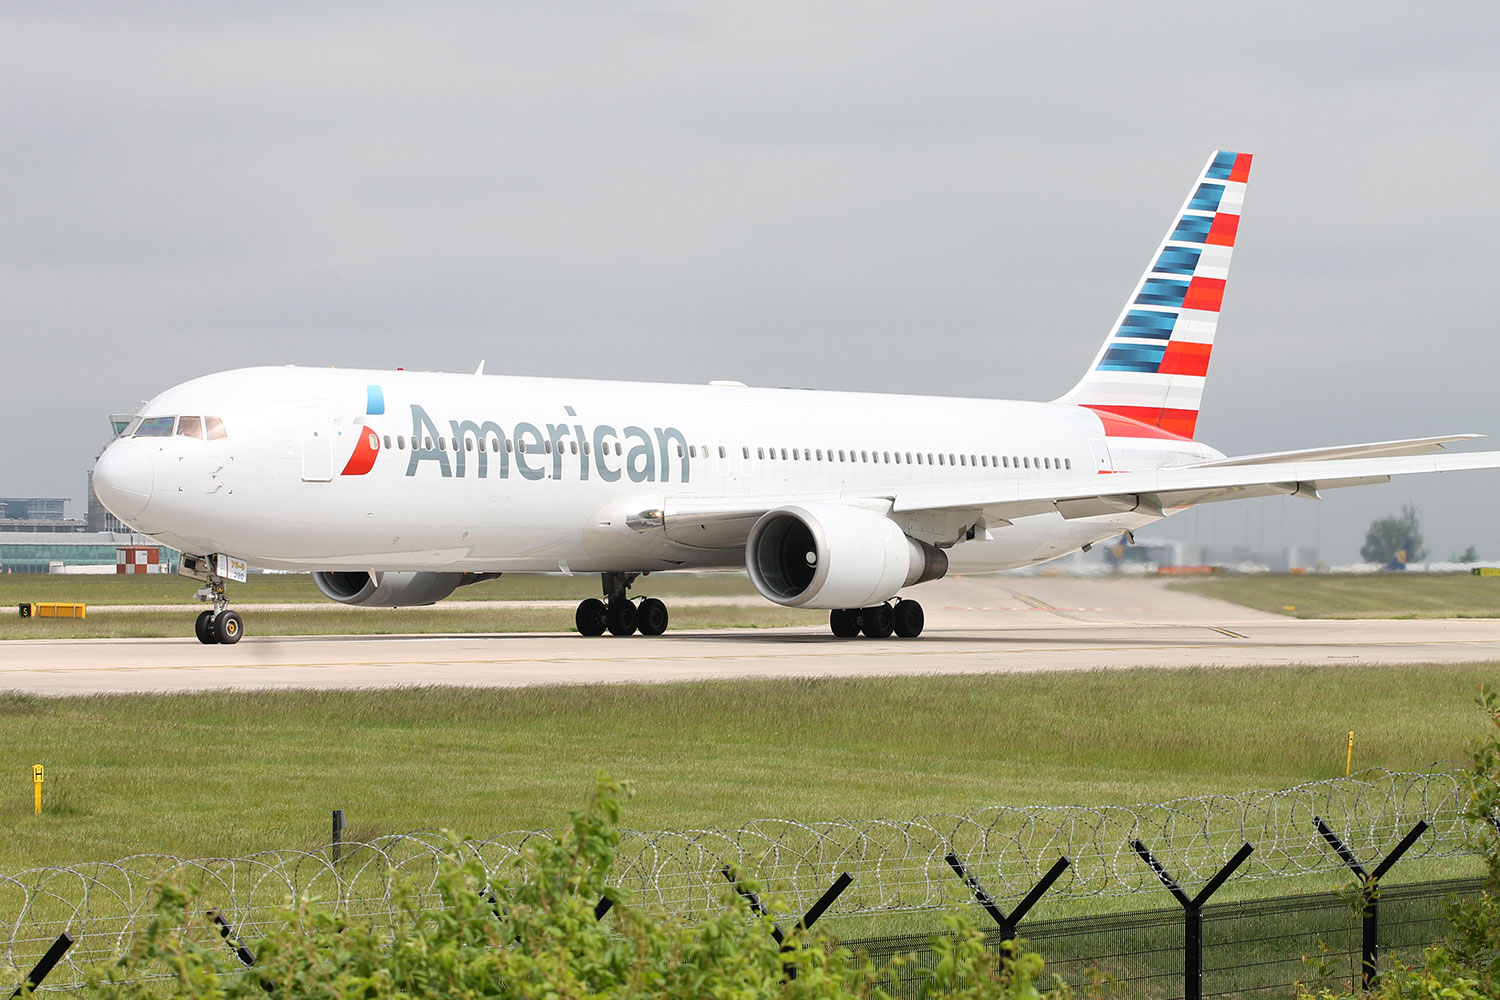 American Airlines is the world's largest airlines